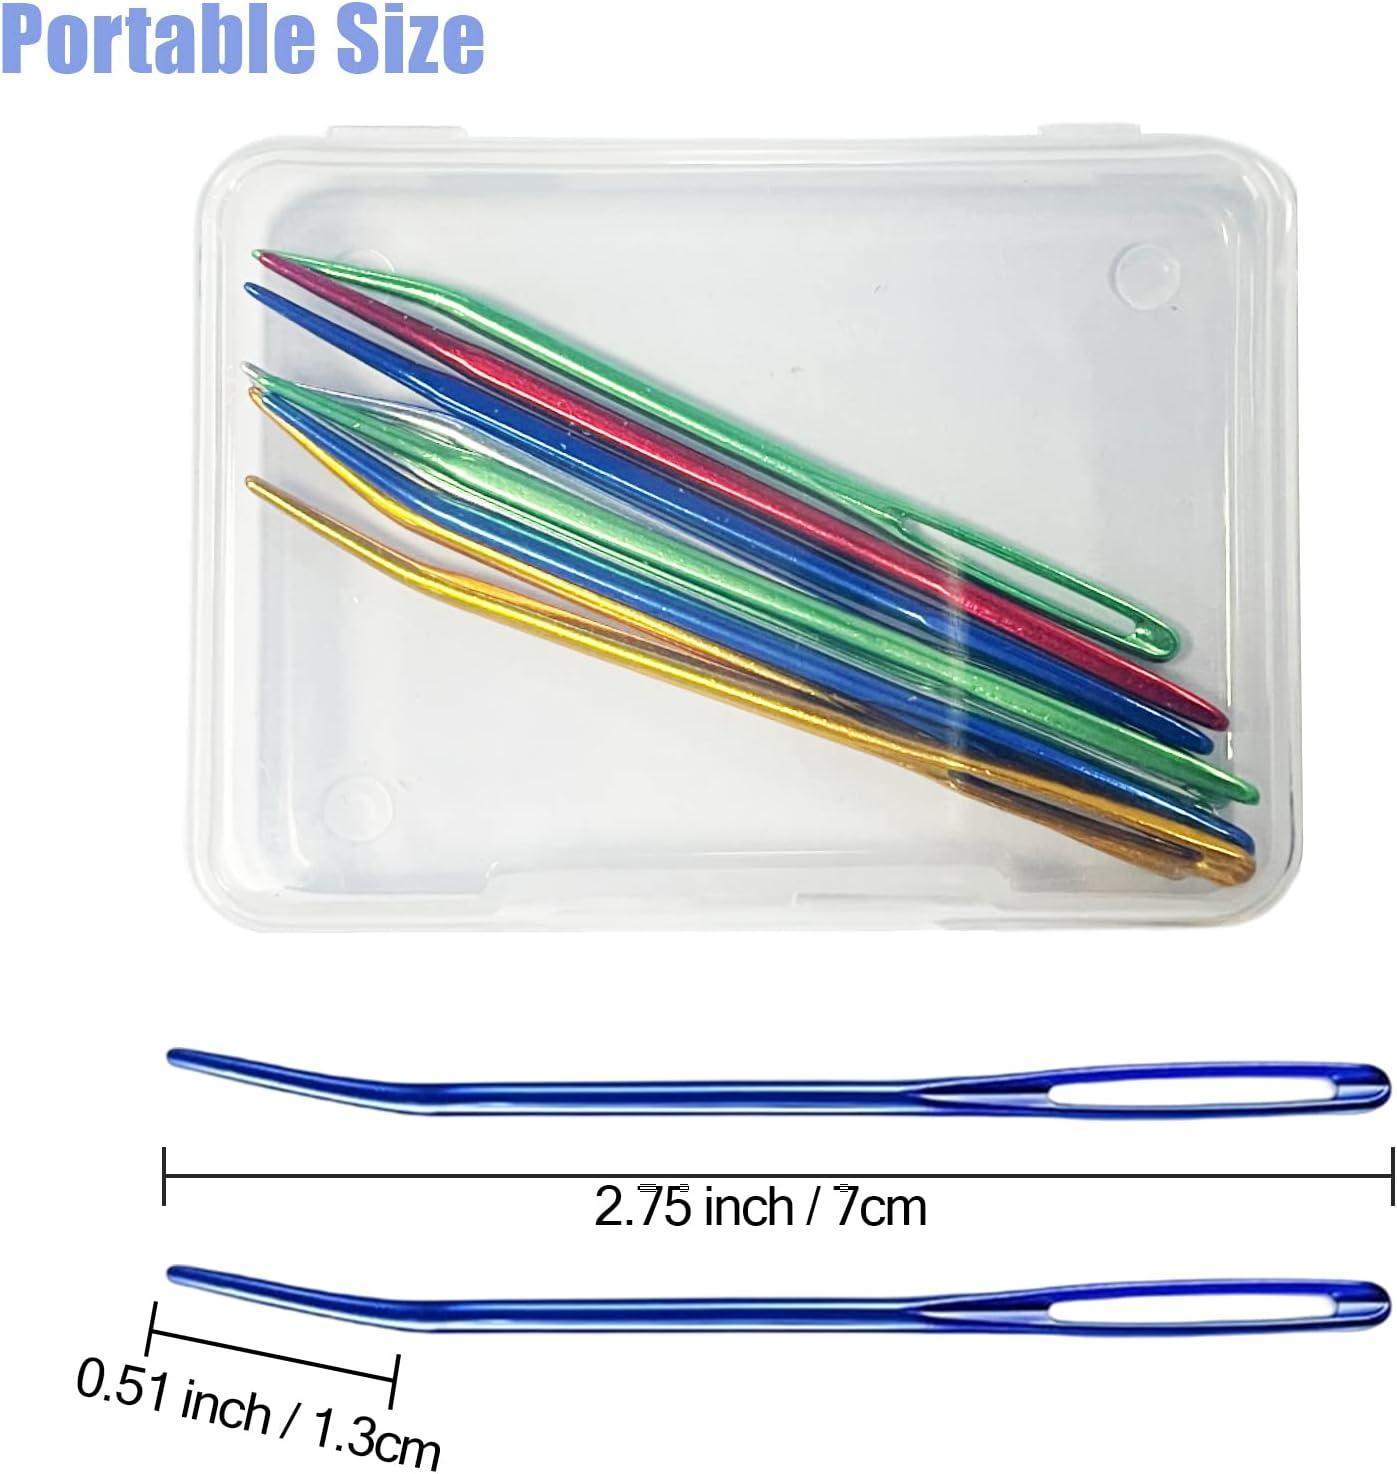  Yarn Needles, Tapestry Needles, Large-Eye Blunt Needles, Darning  Needles for Crocheting with Knitting Cable Needles, Storage Box, Bent  Tapestry Needles for Knitting Crochet : Arts, Crafts & Sewing